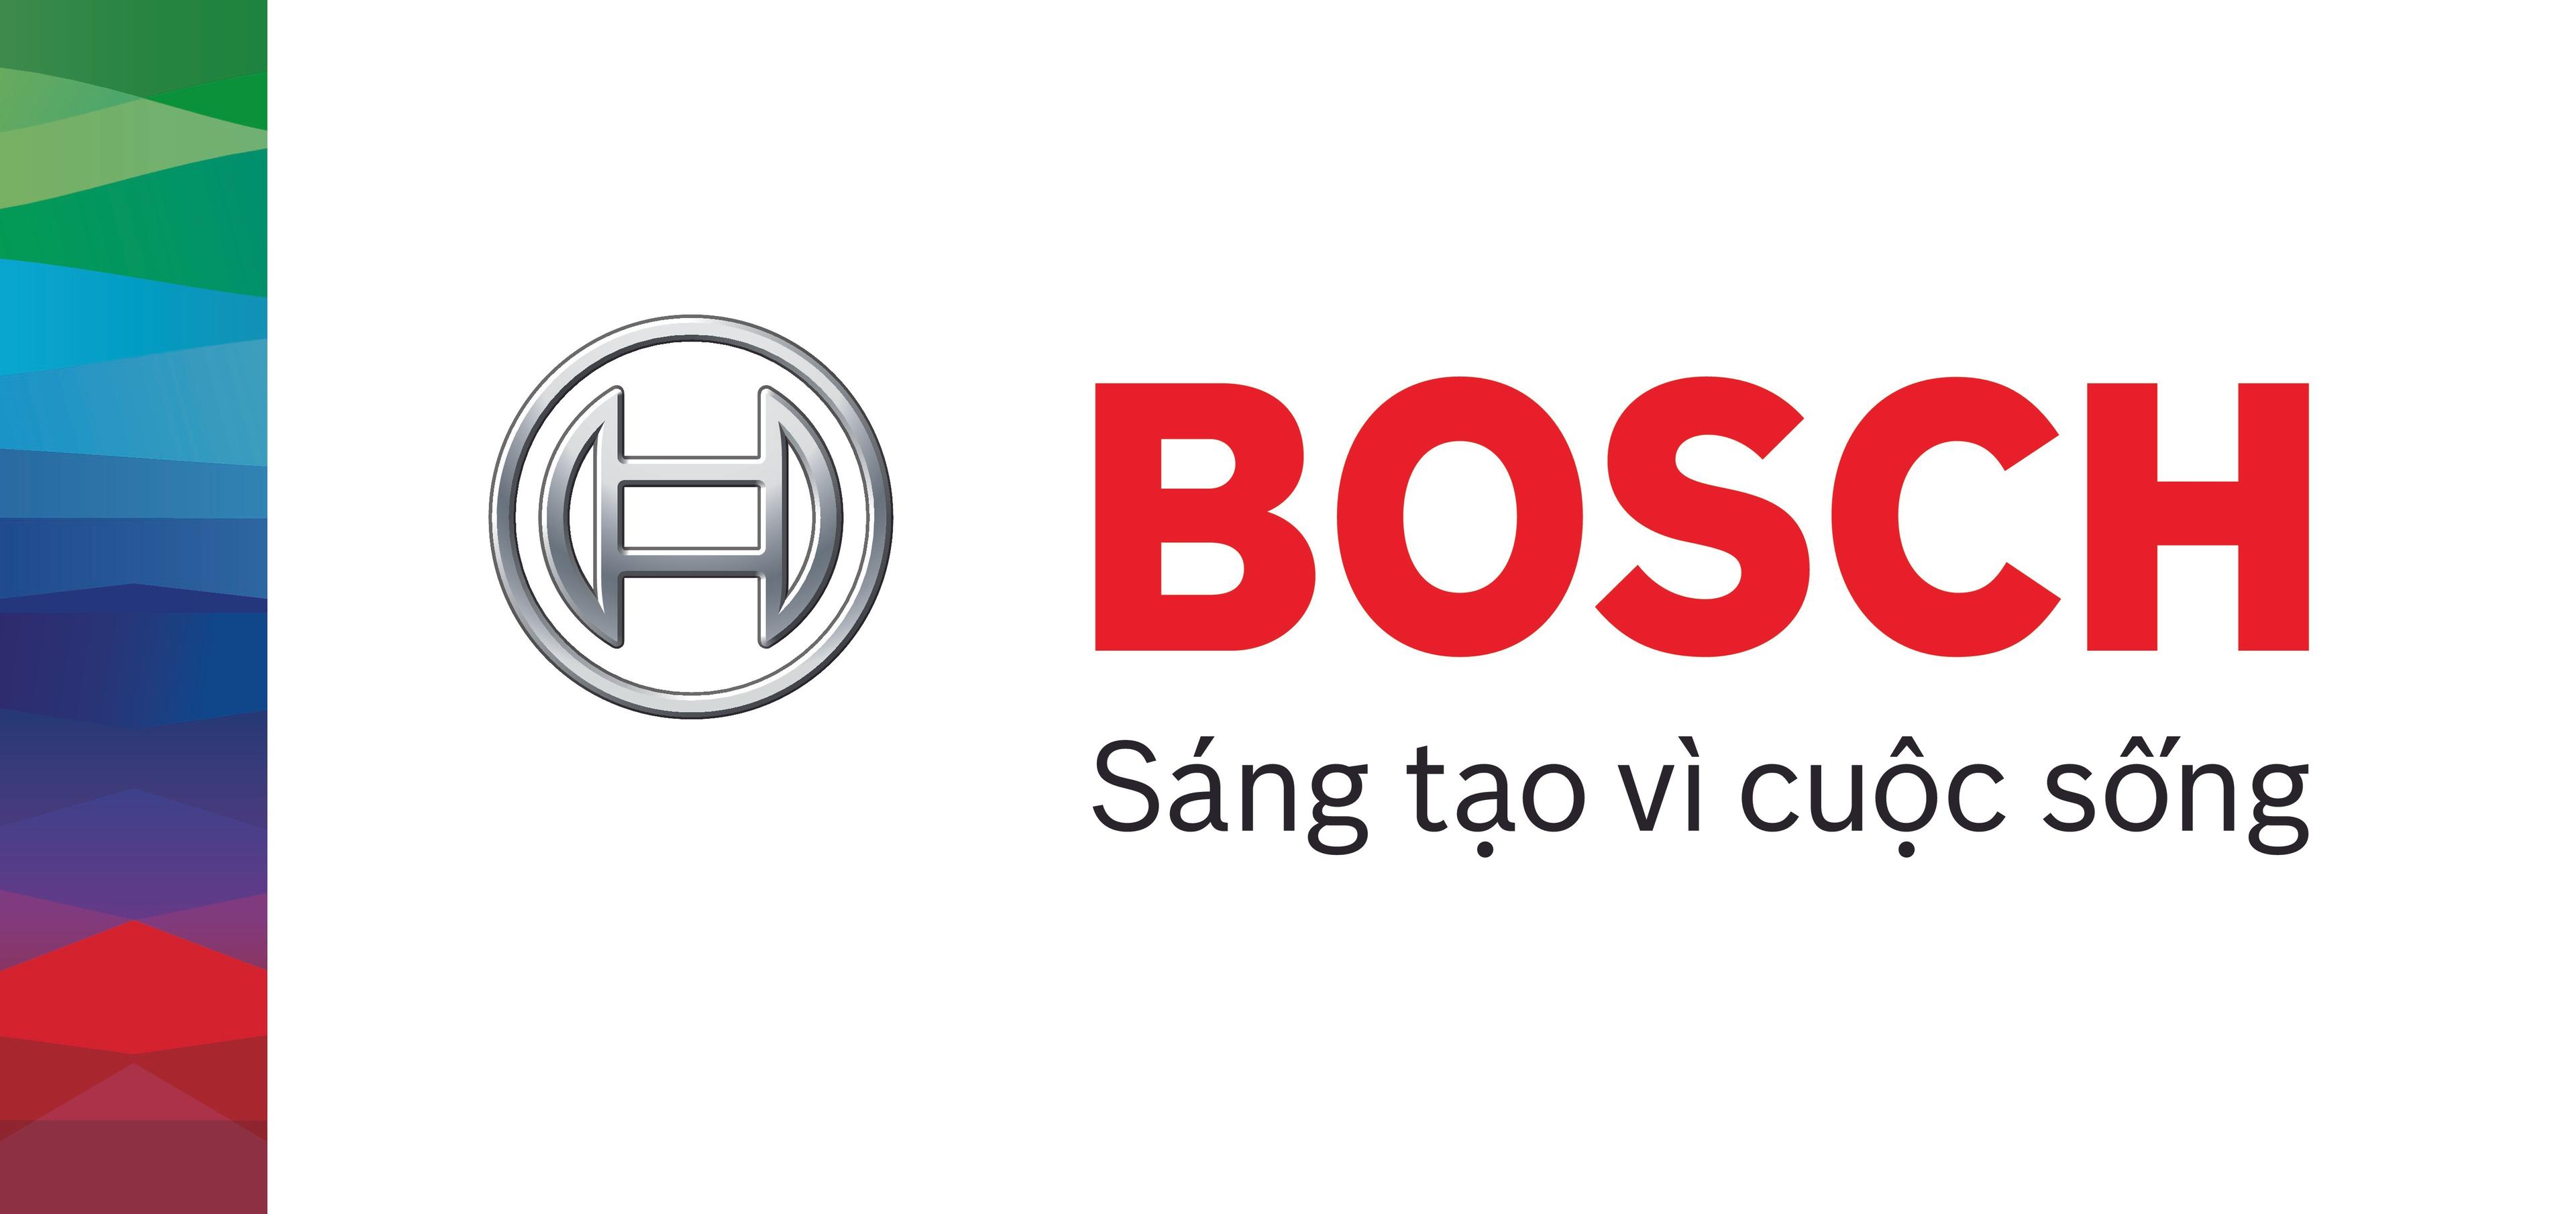 Latest Bosch Vietnam Co., Ltd In Dong Nai employment/hiring with high salary & attractive benefits